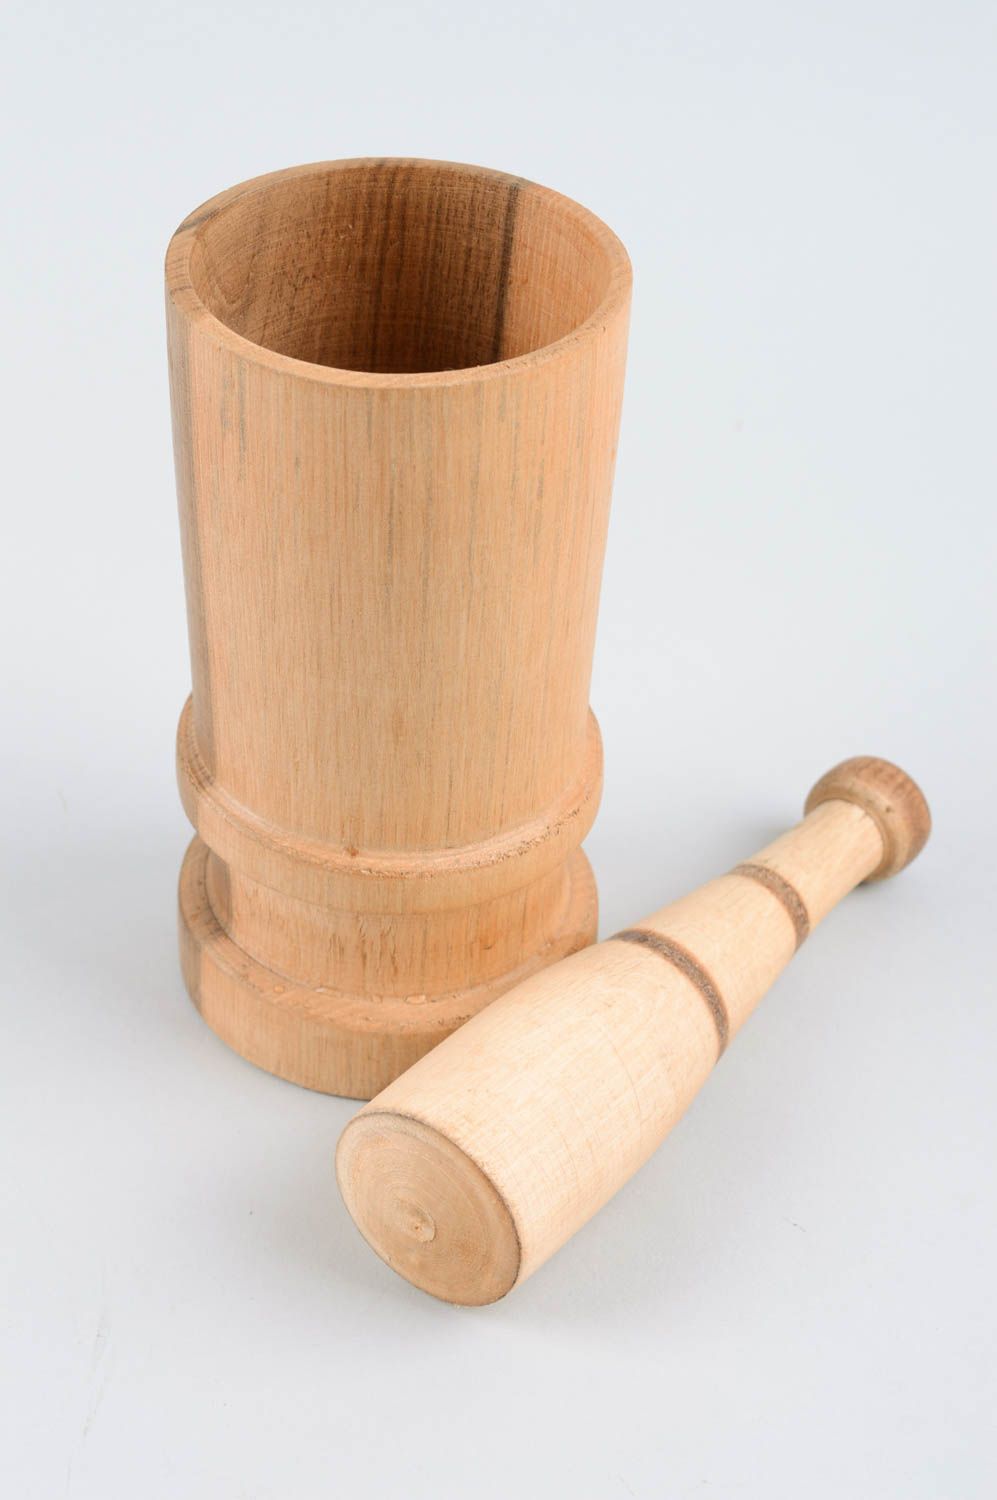 Handmade wooden mortar homemade mortar and pestle wooden kitchenware eco gifts photo 2